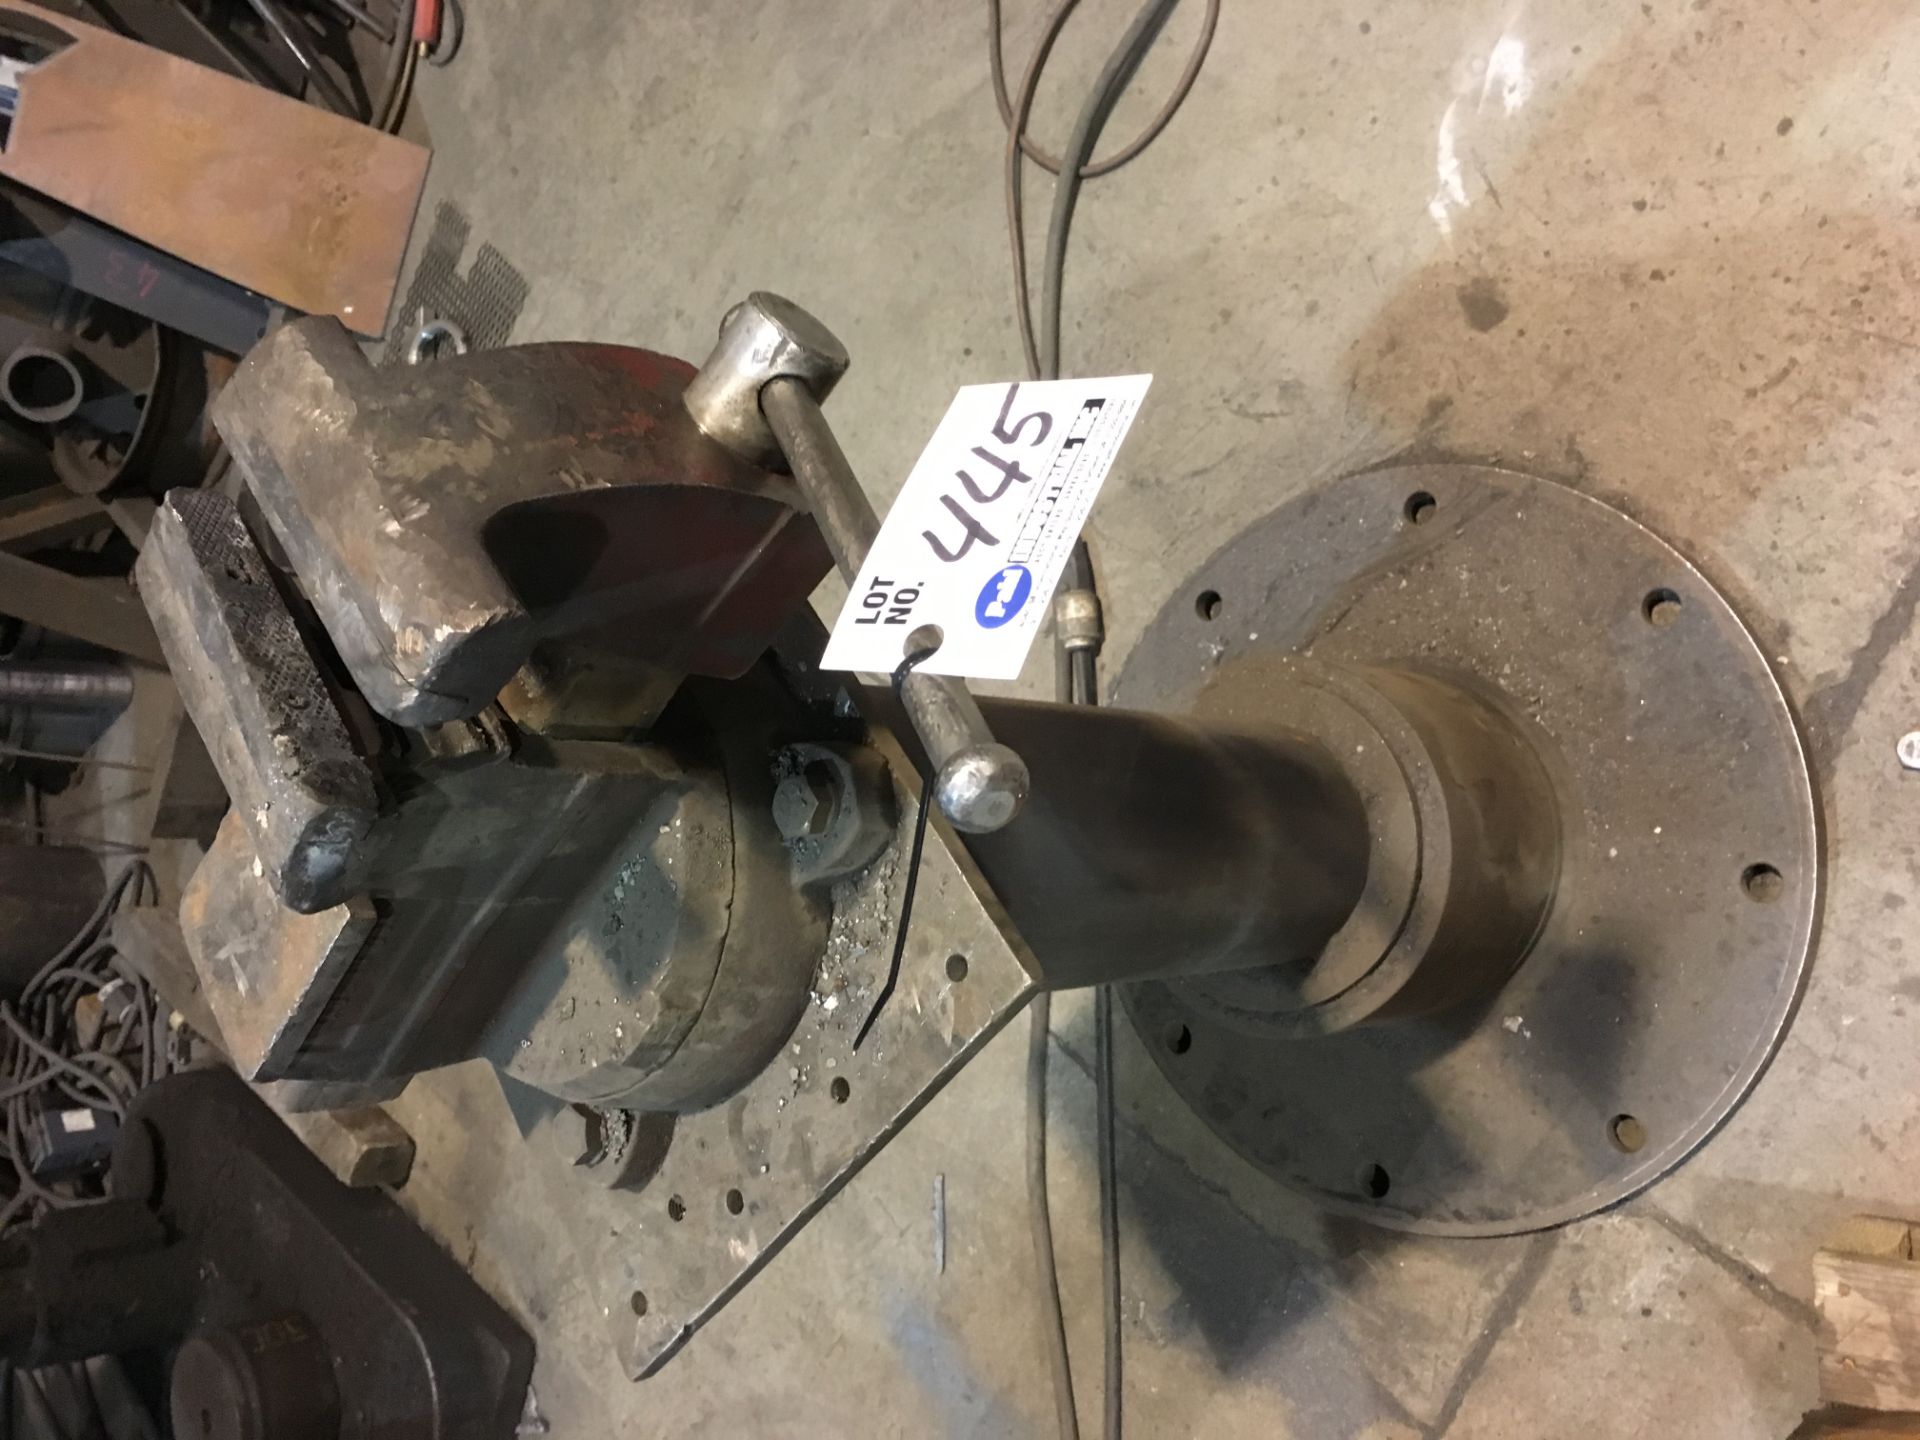 6" Vise on stand